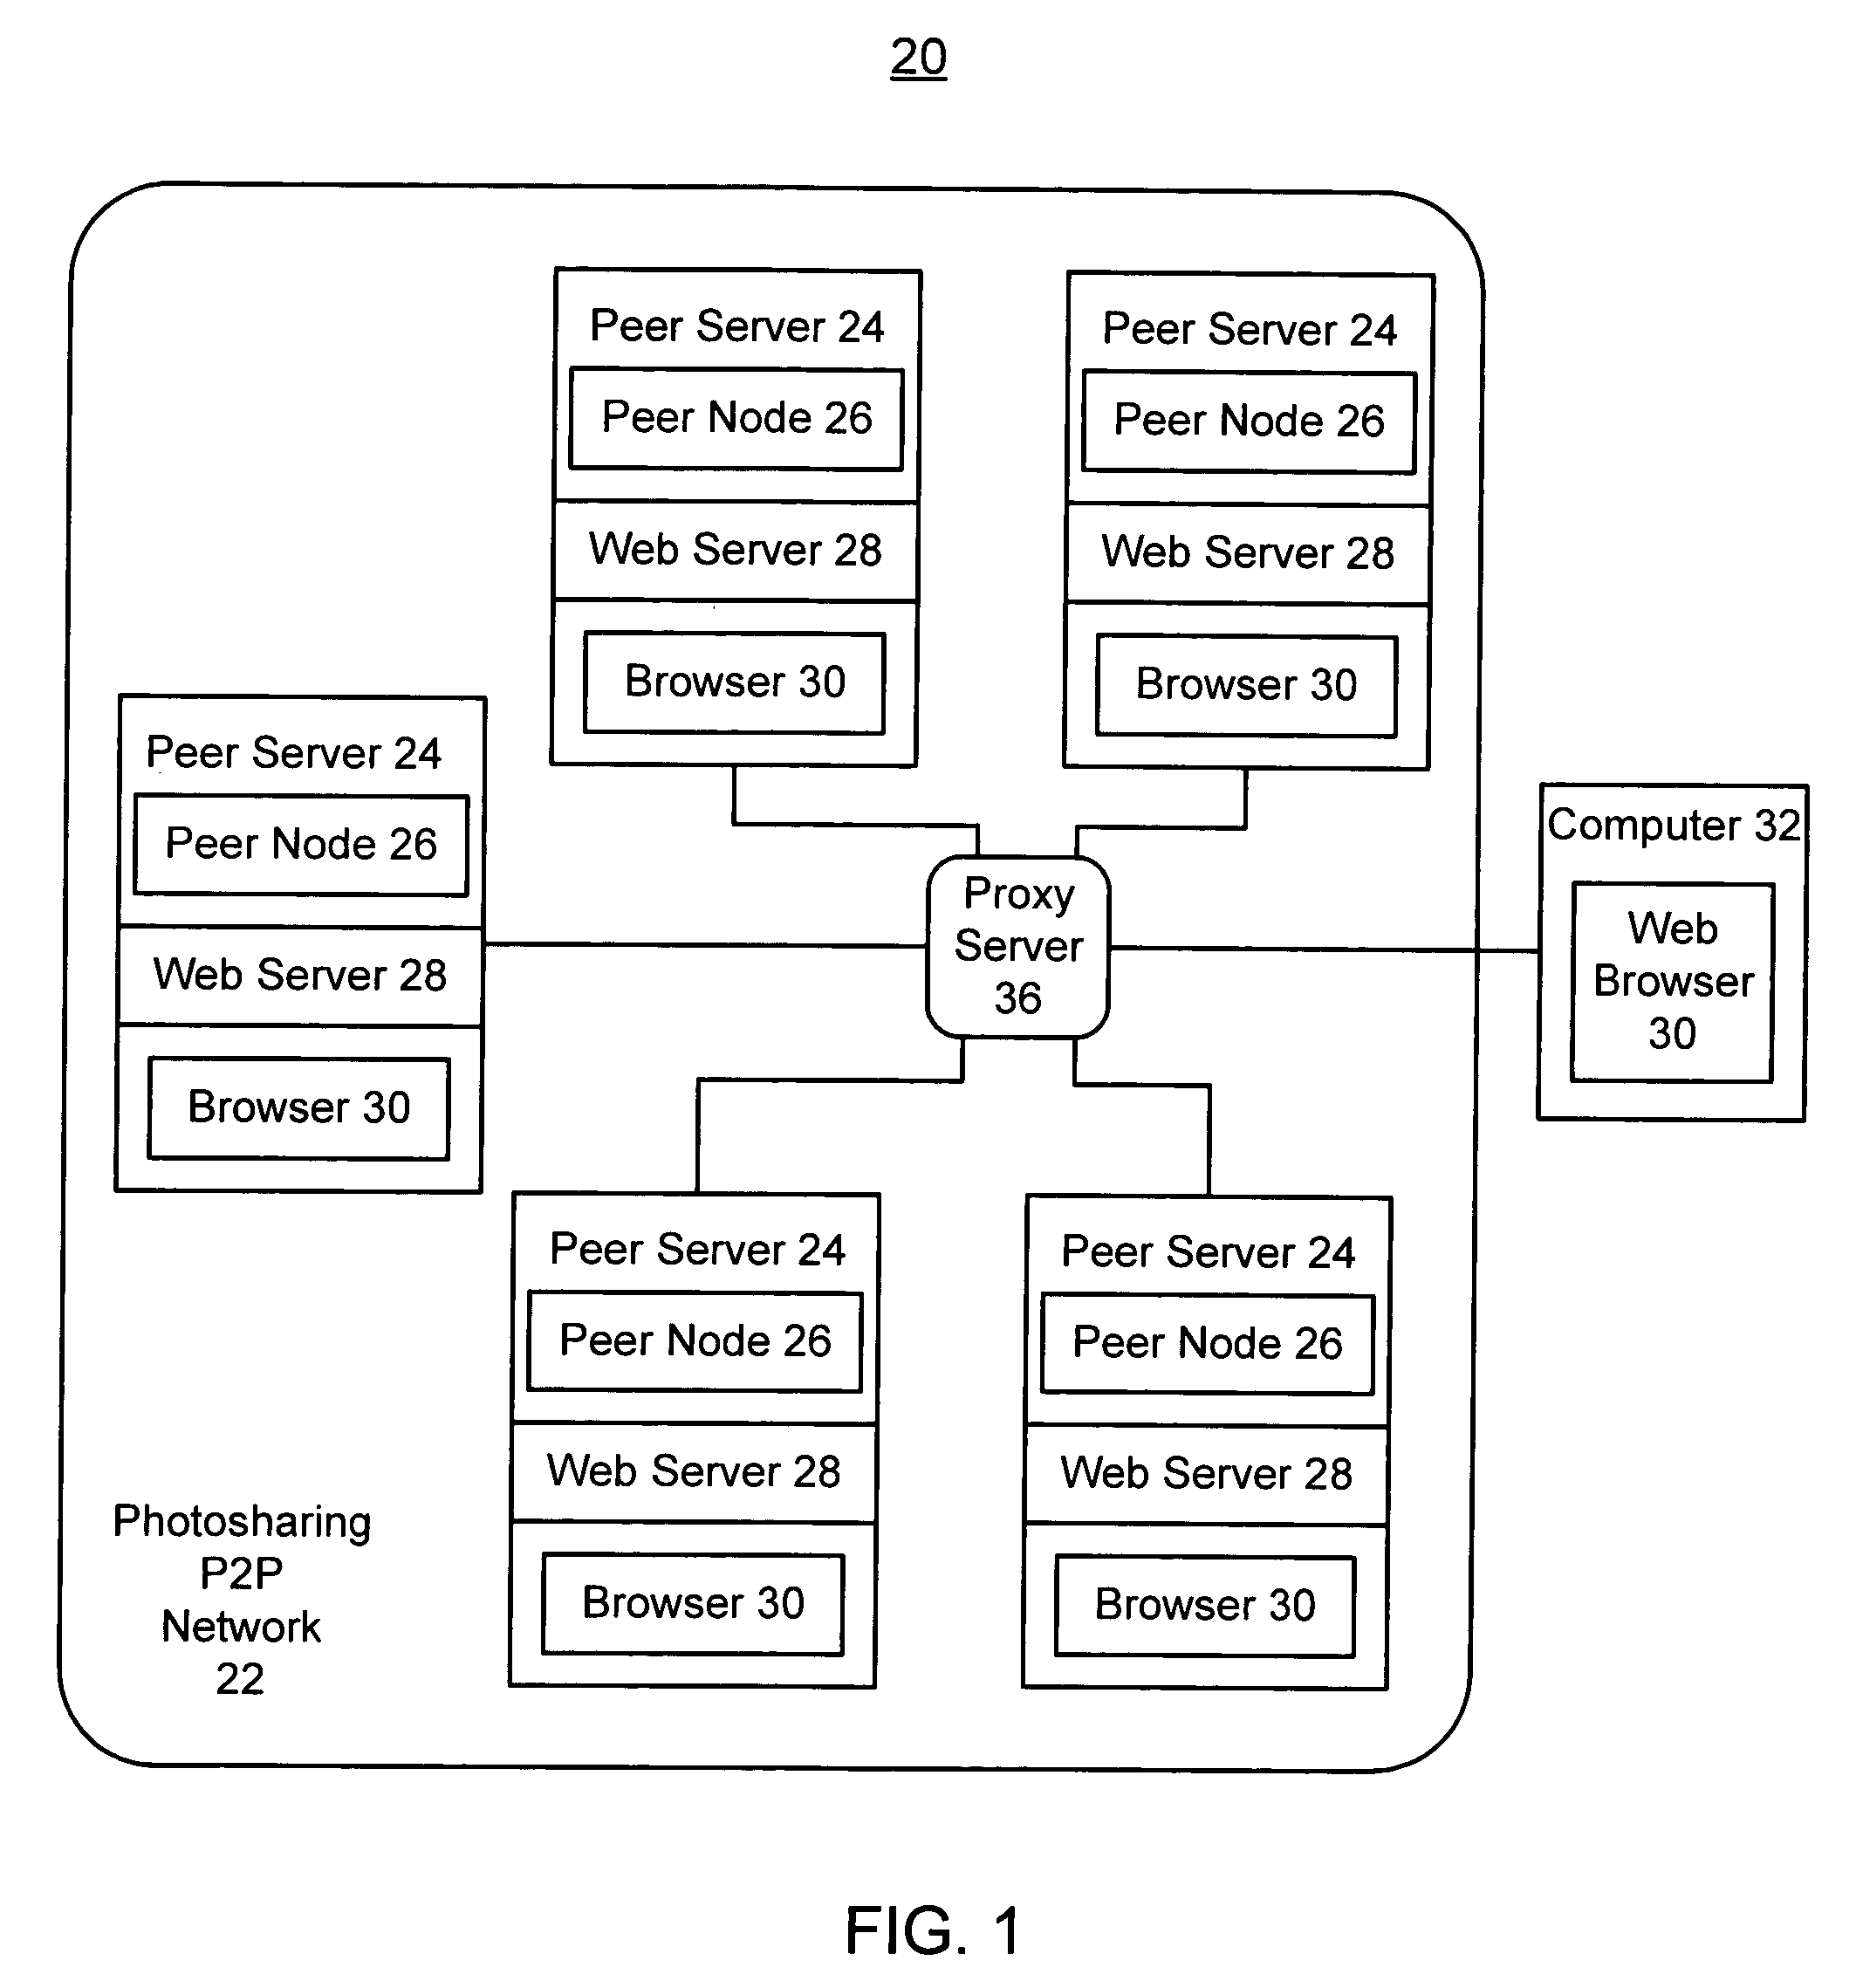 Method and system for providing image rich web pages from a computer system over a network